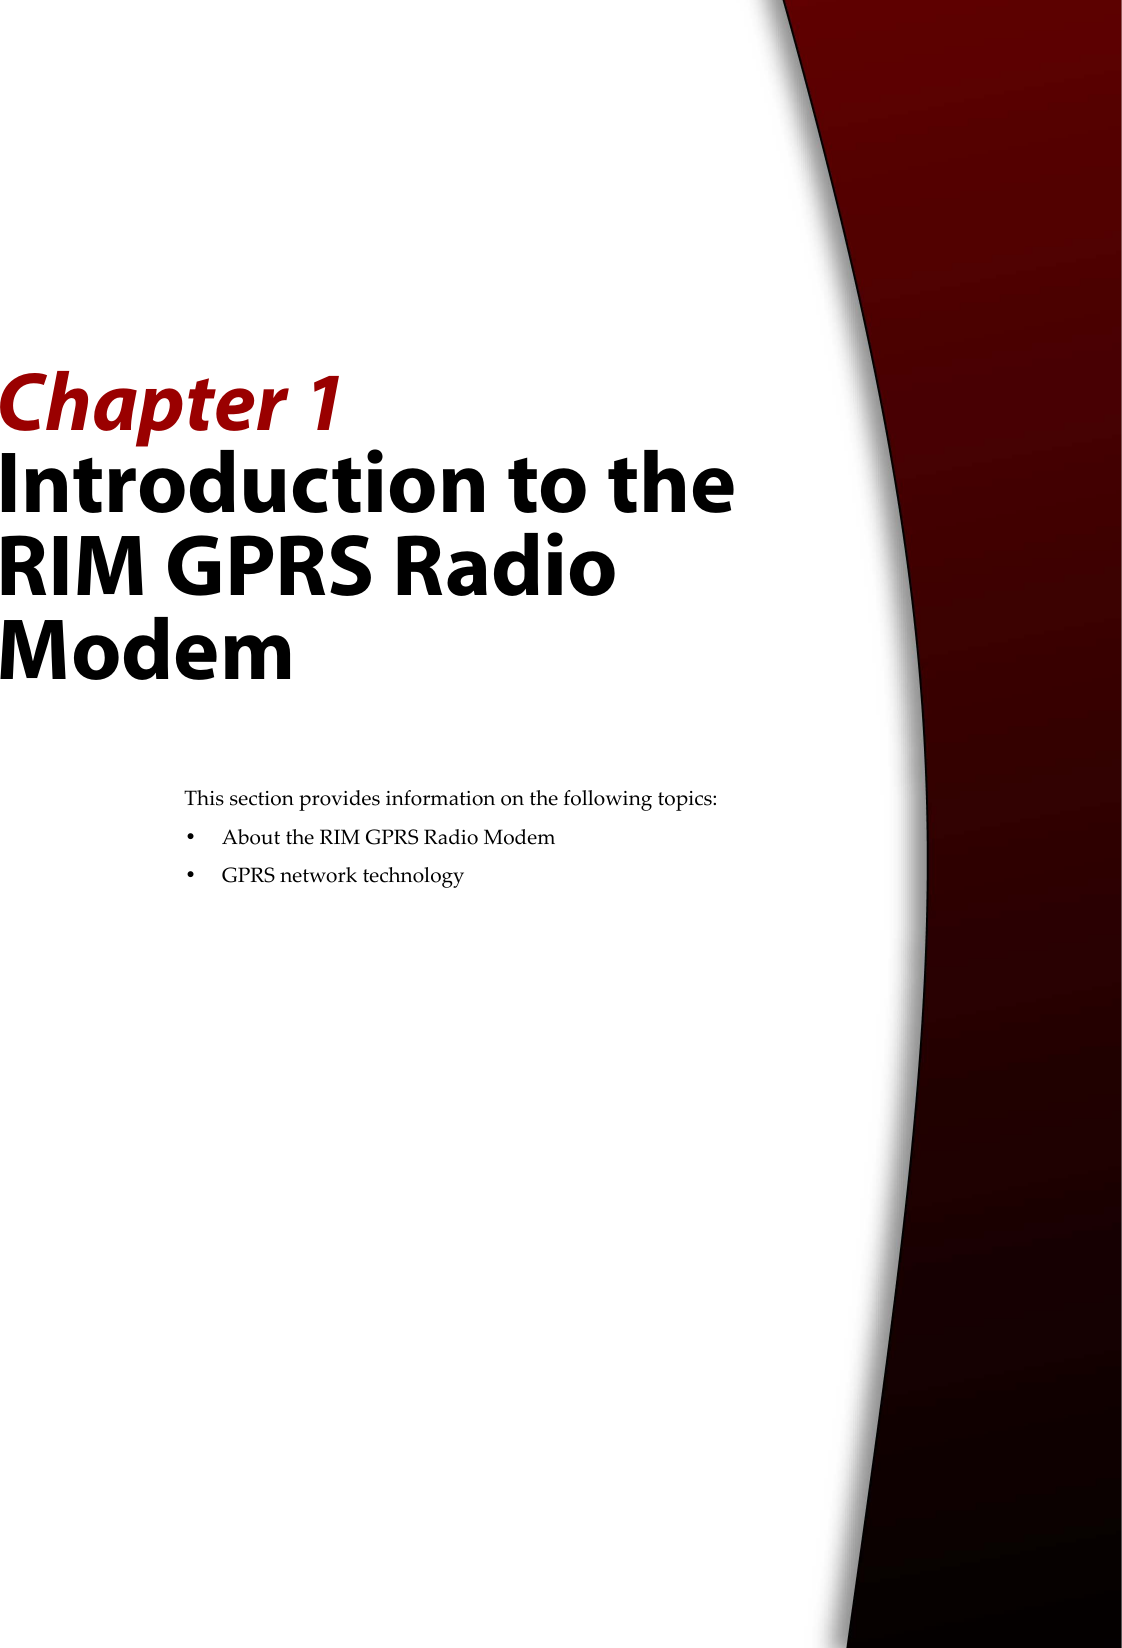 Chapter 1Introduction to the RIM GPRS Radio ModemThis section provides information on the following topics:•About the RIM GPRS Radio Modem•GPRS network technology